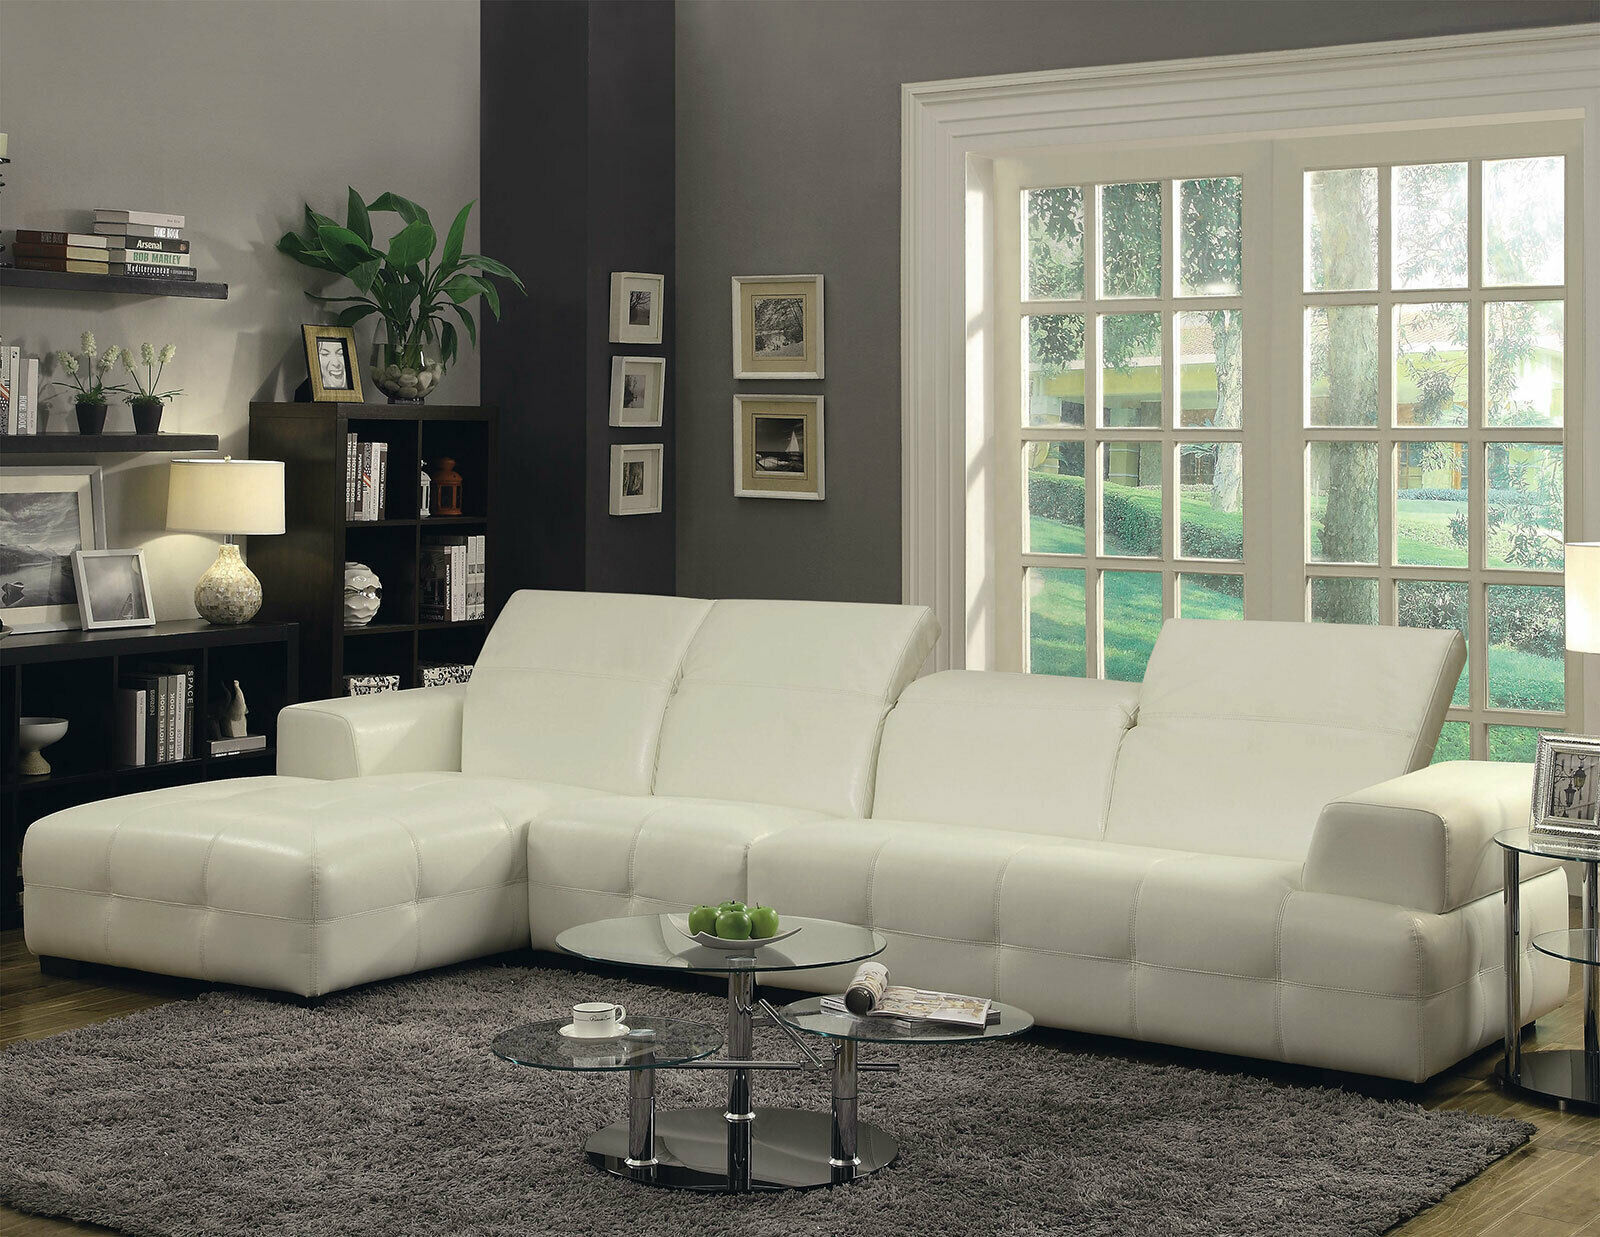 room with white leather sofa